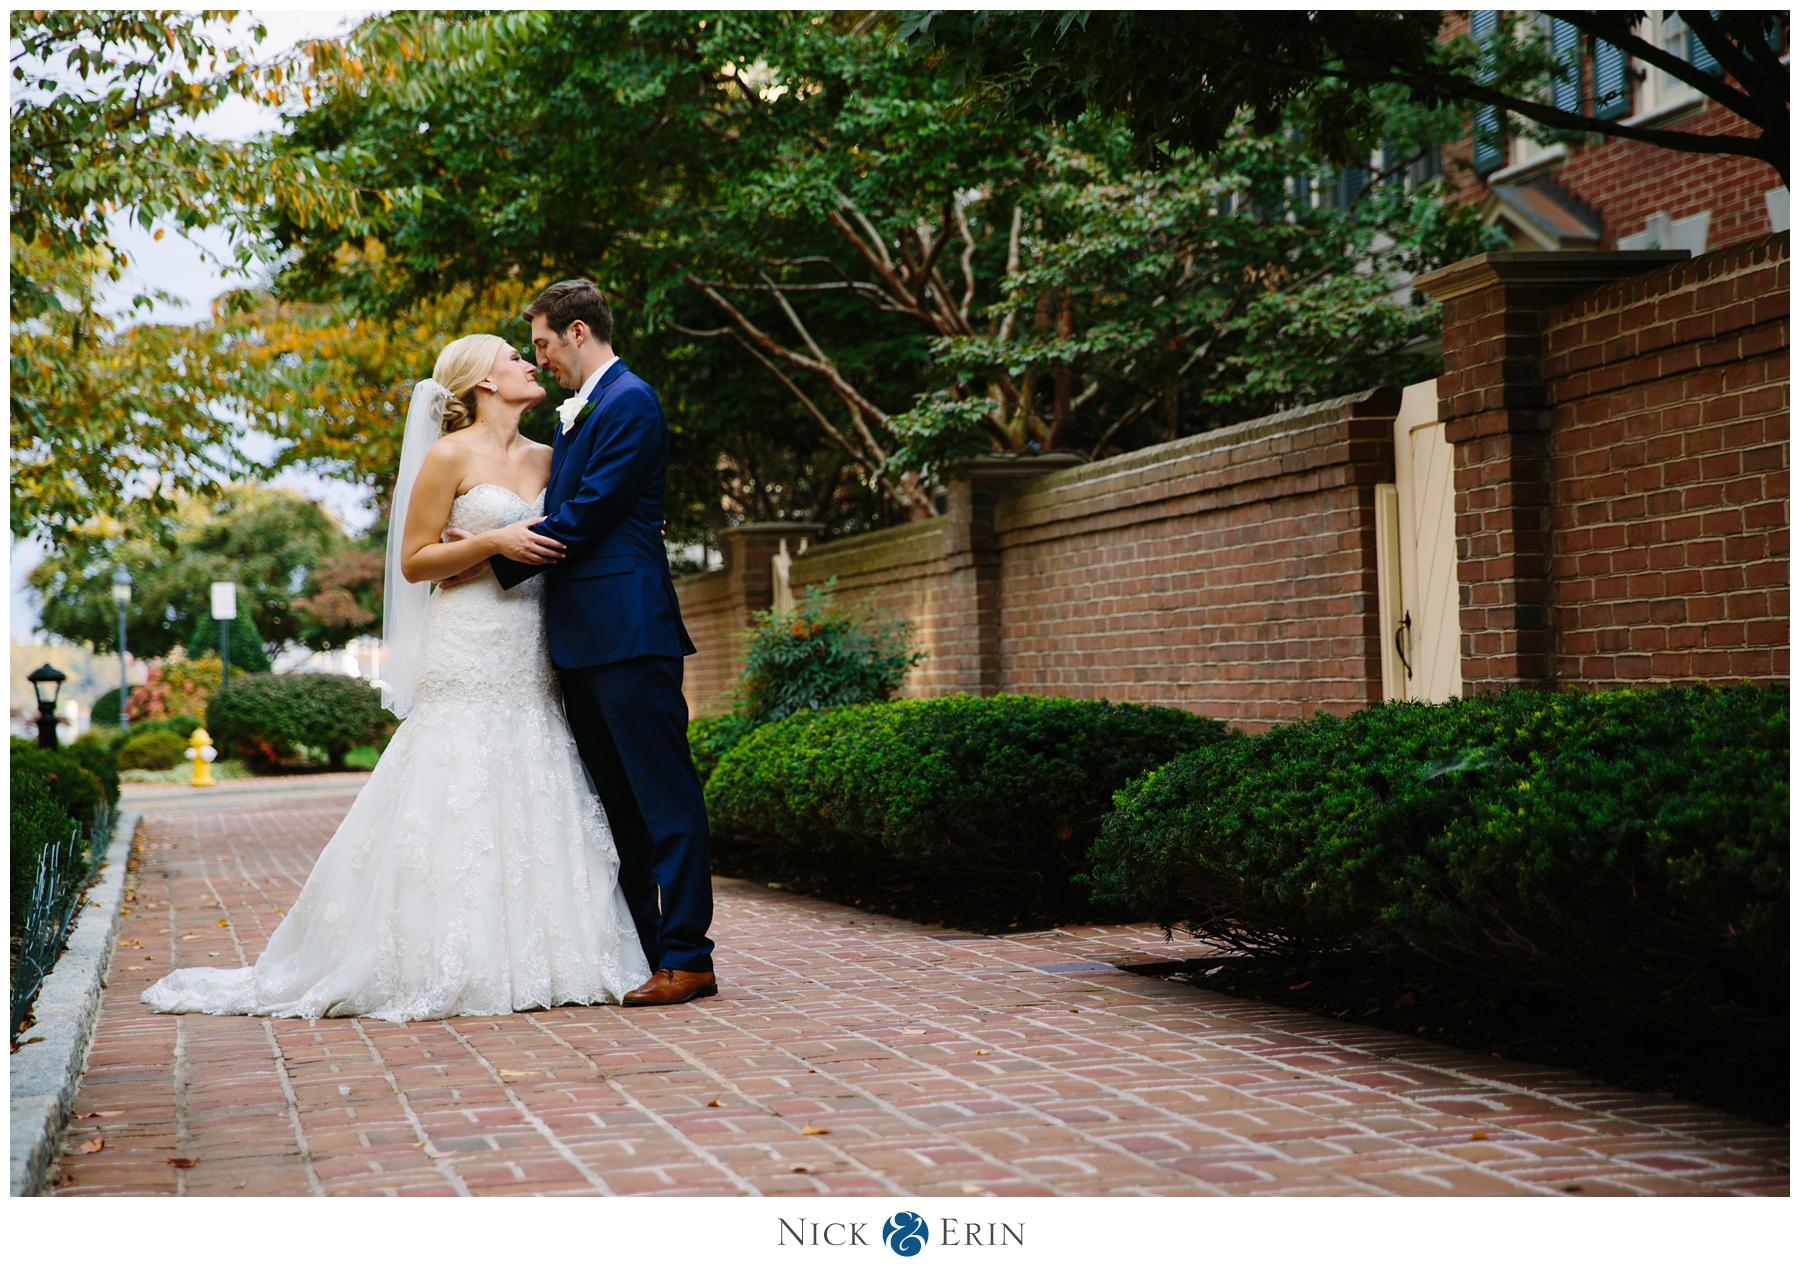 Donner_Photography_Torpedo Factory Wedding_Courtney and Scott_0008